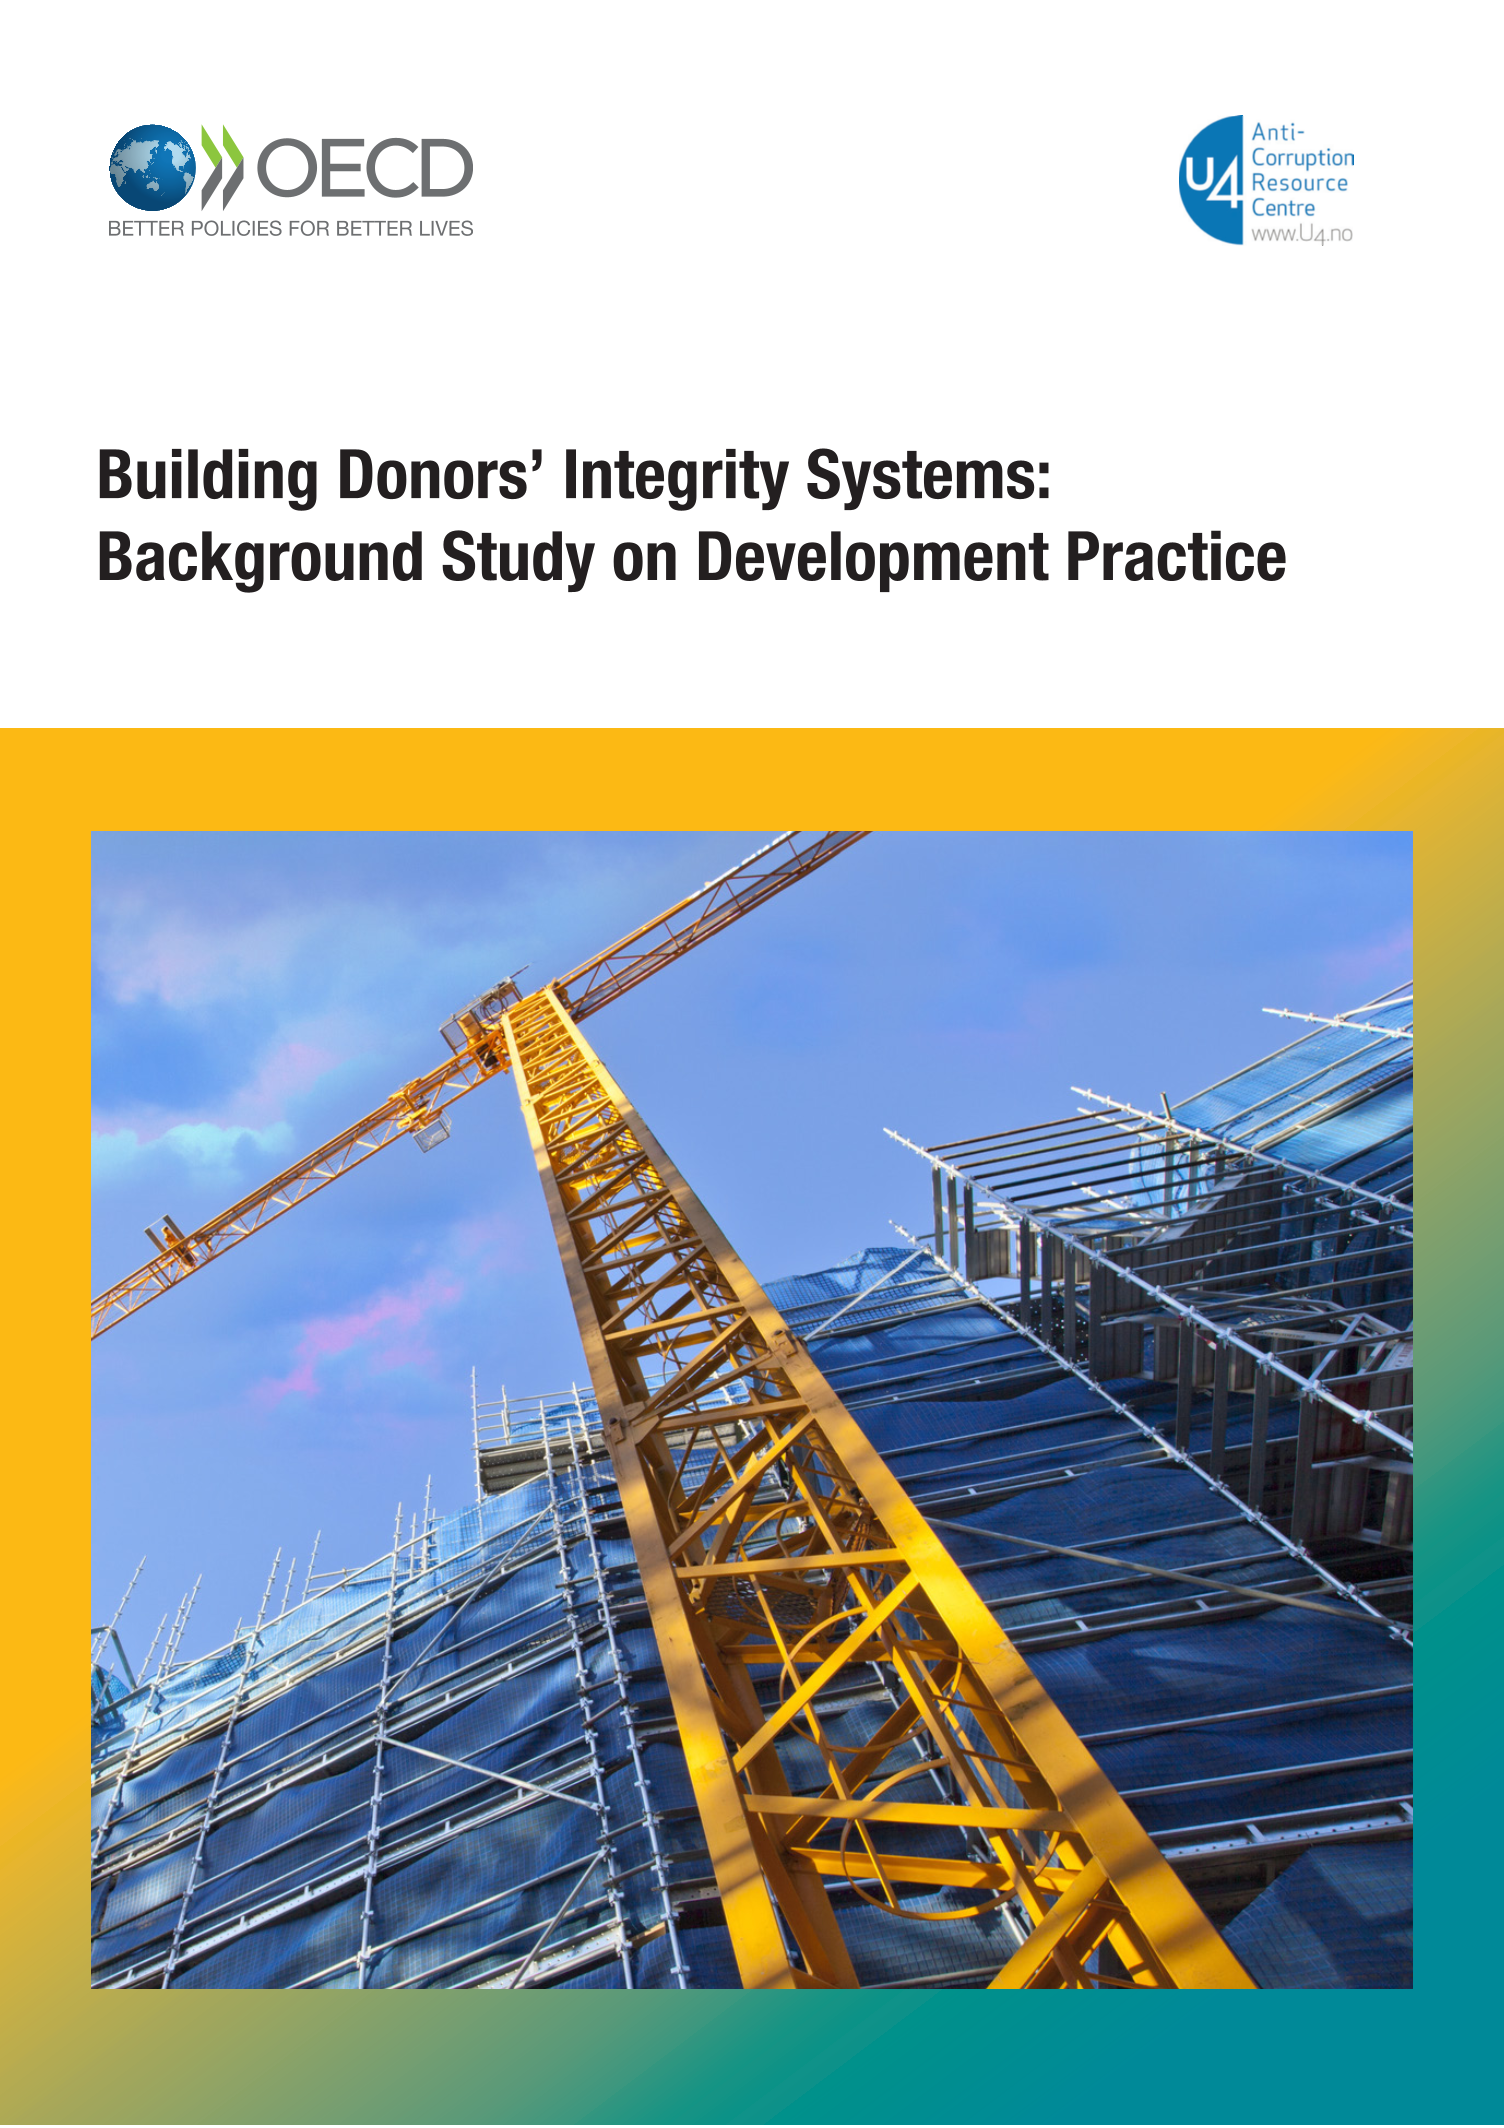 Building Donors’ Integrity Systems: Background Study on Development Practice